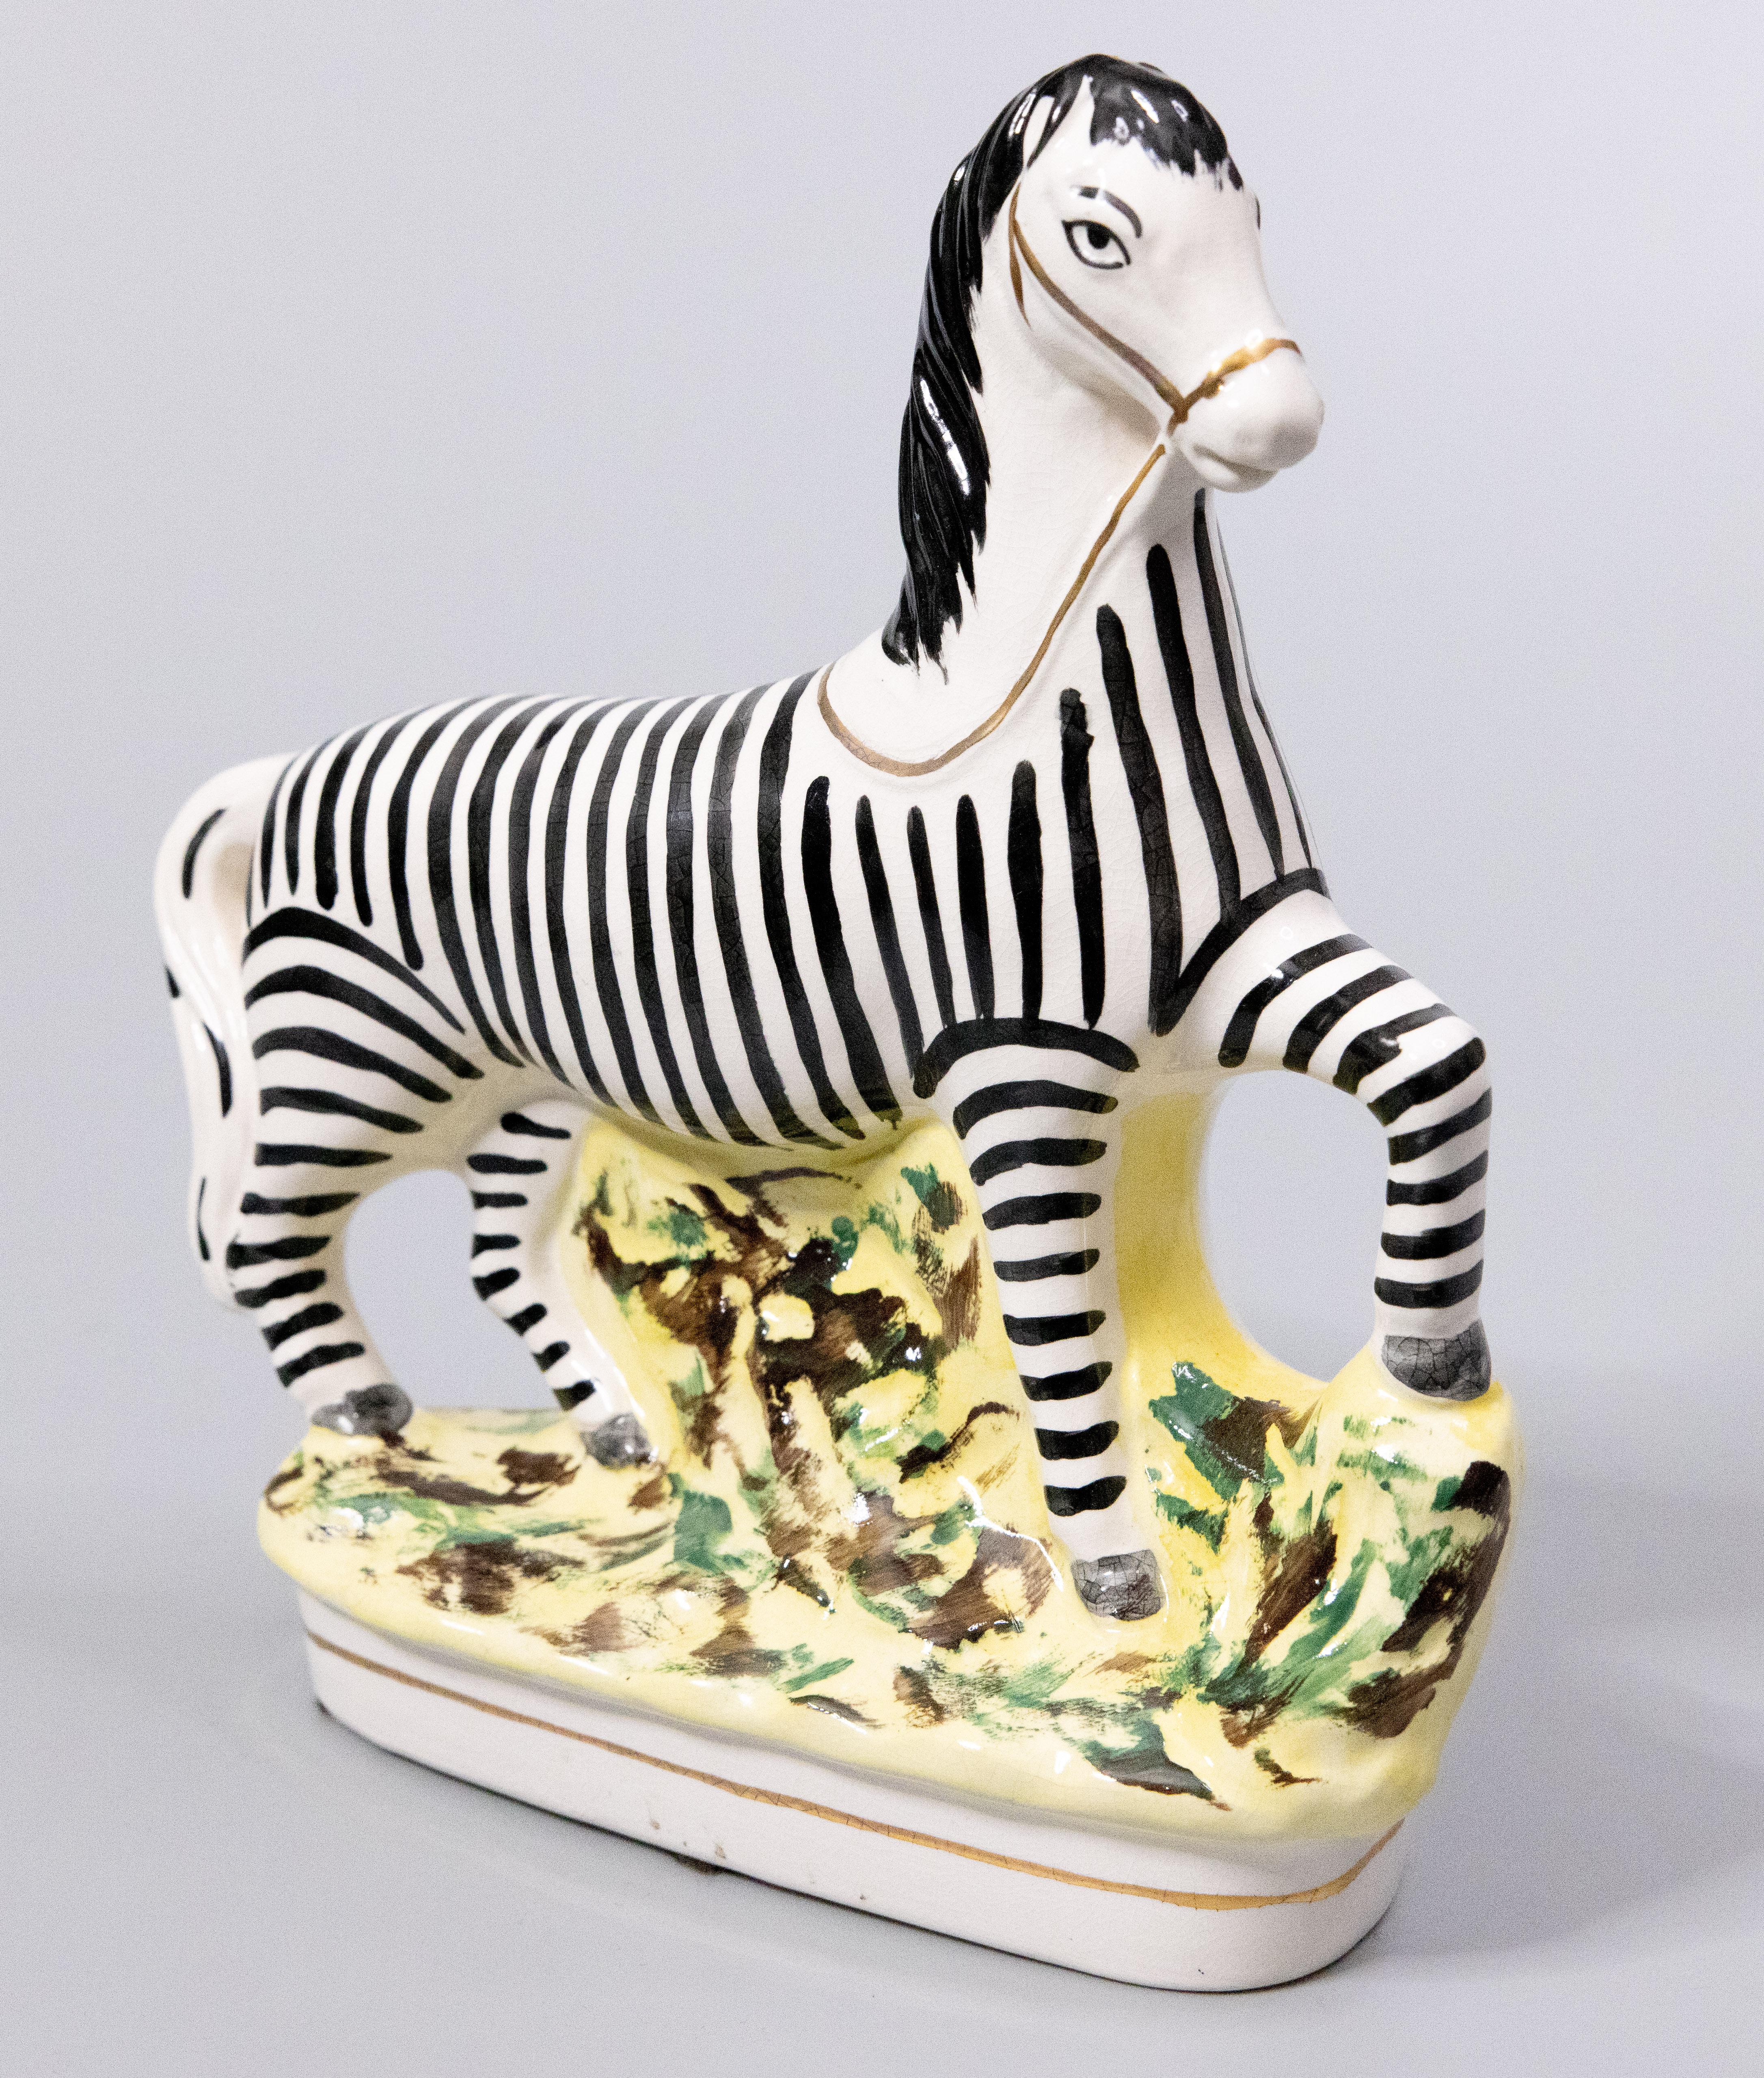 A superb 19th-century English Staffordshire prancing zebra figurine. This charming zebra is hand painted with fine details and would be perfect for display or added to a collection.